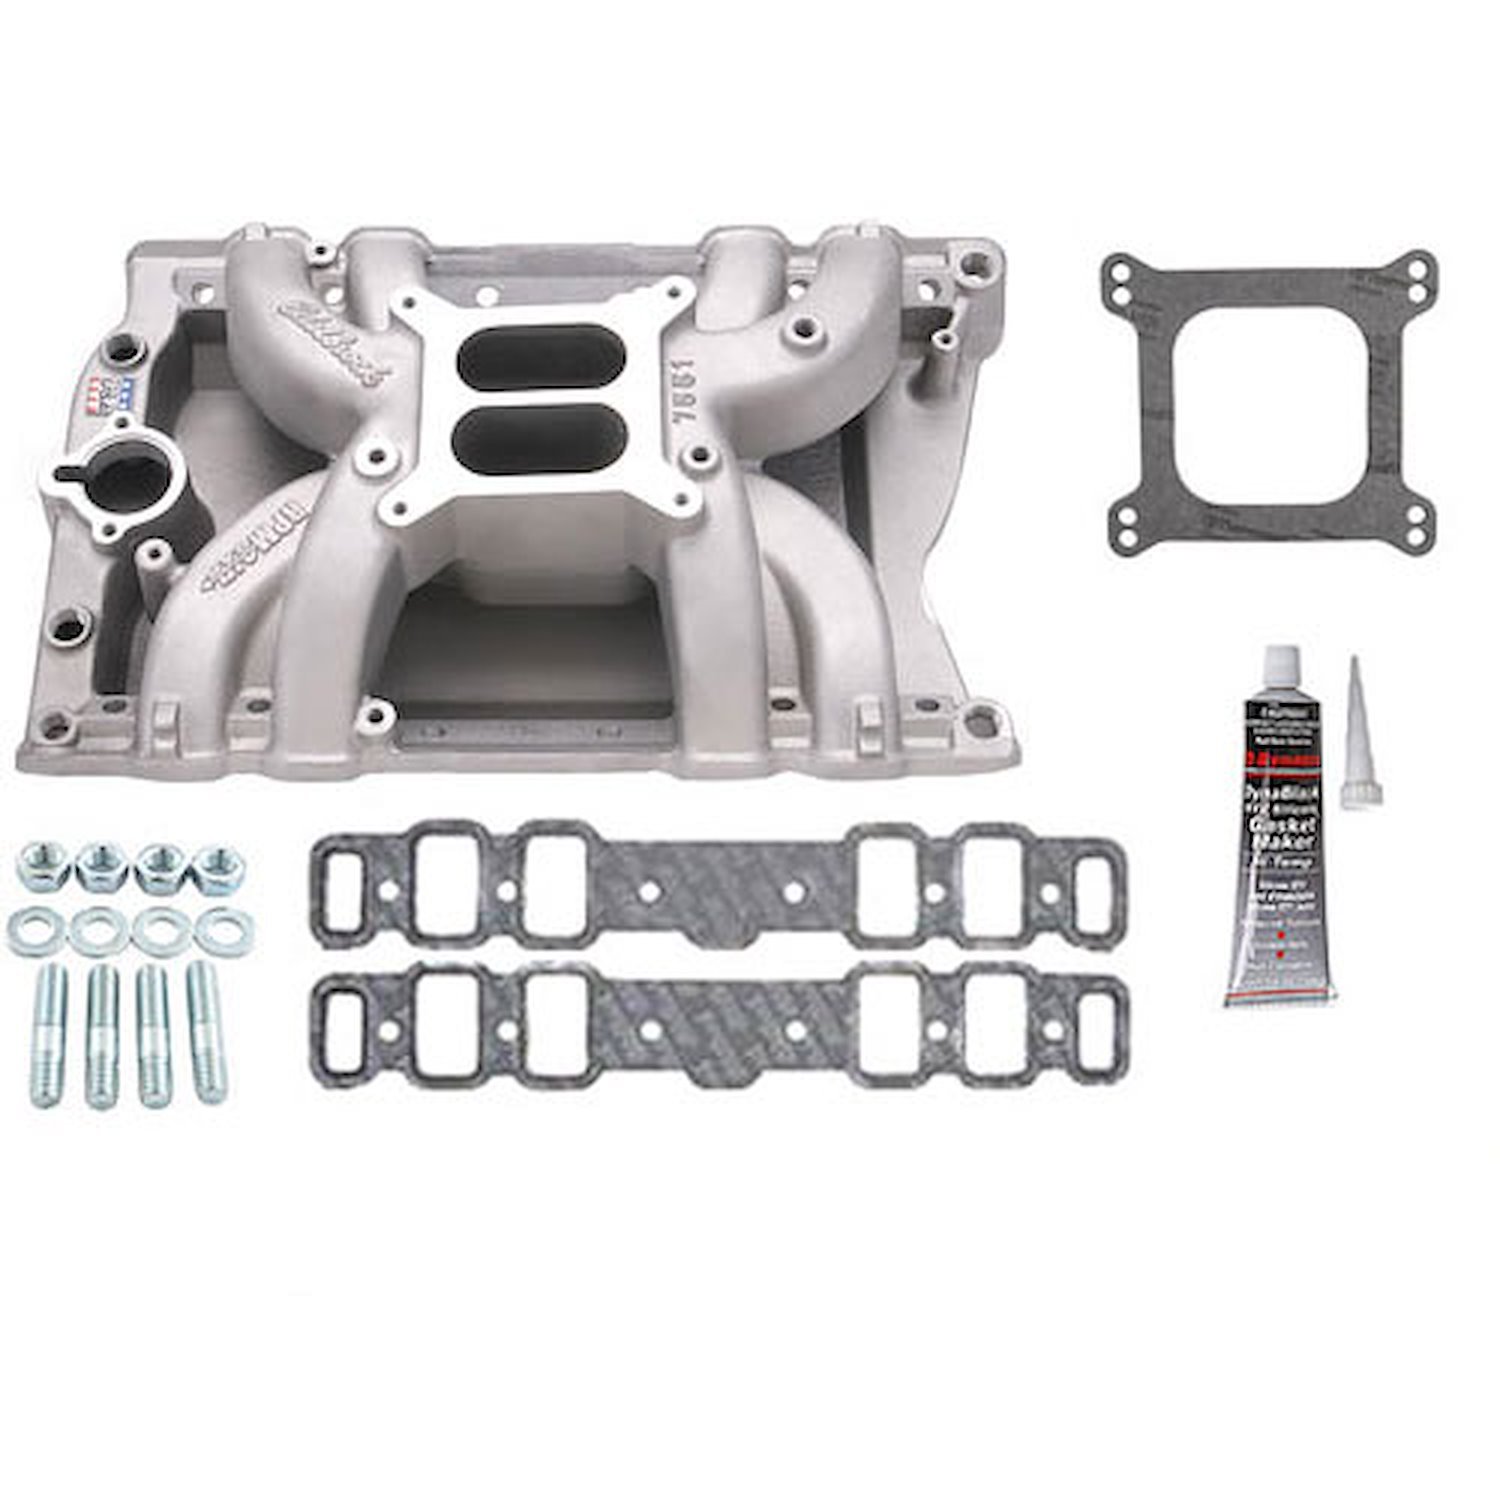 RPM Air-Gap Olds 455 Intake Manifold with Installation Kit